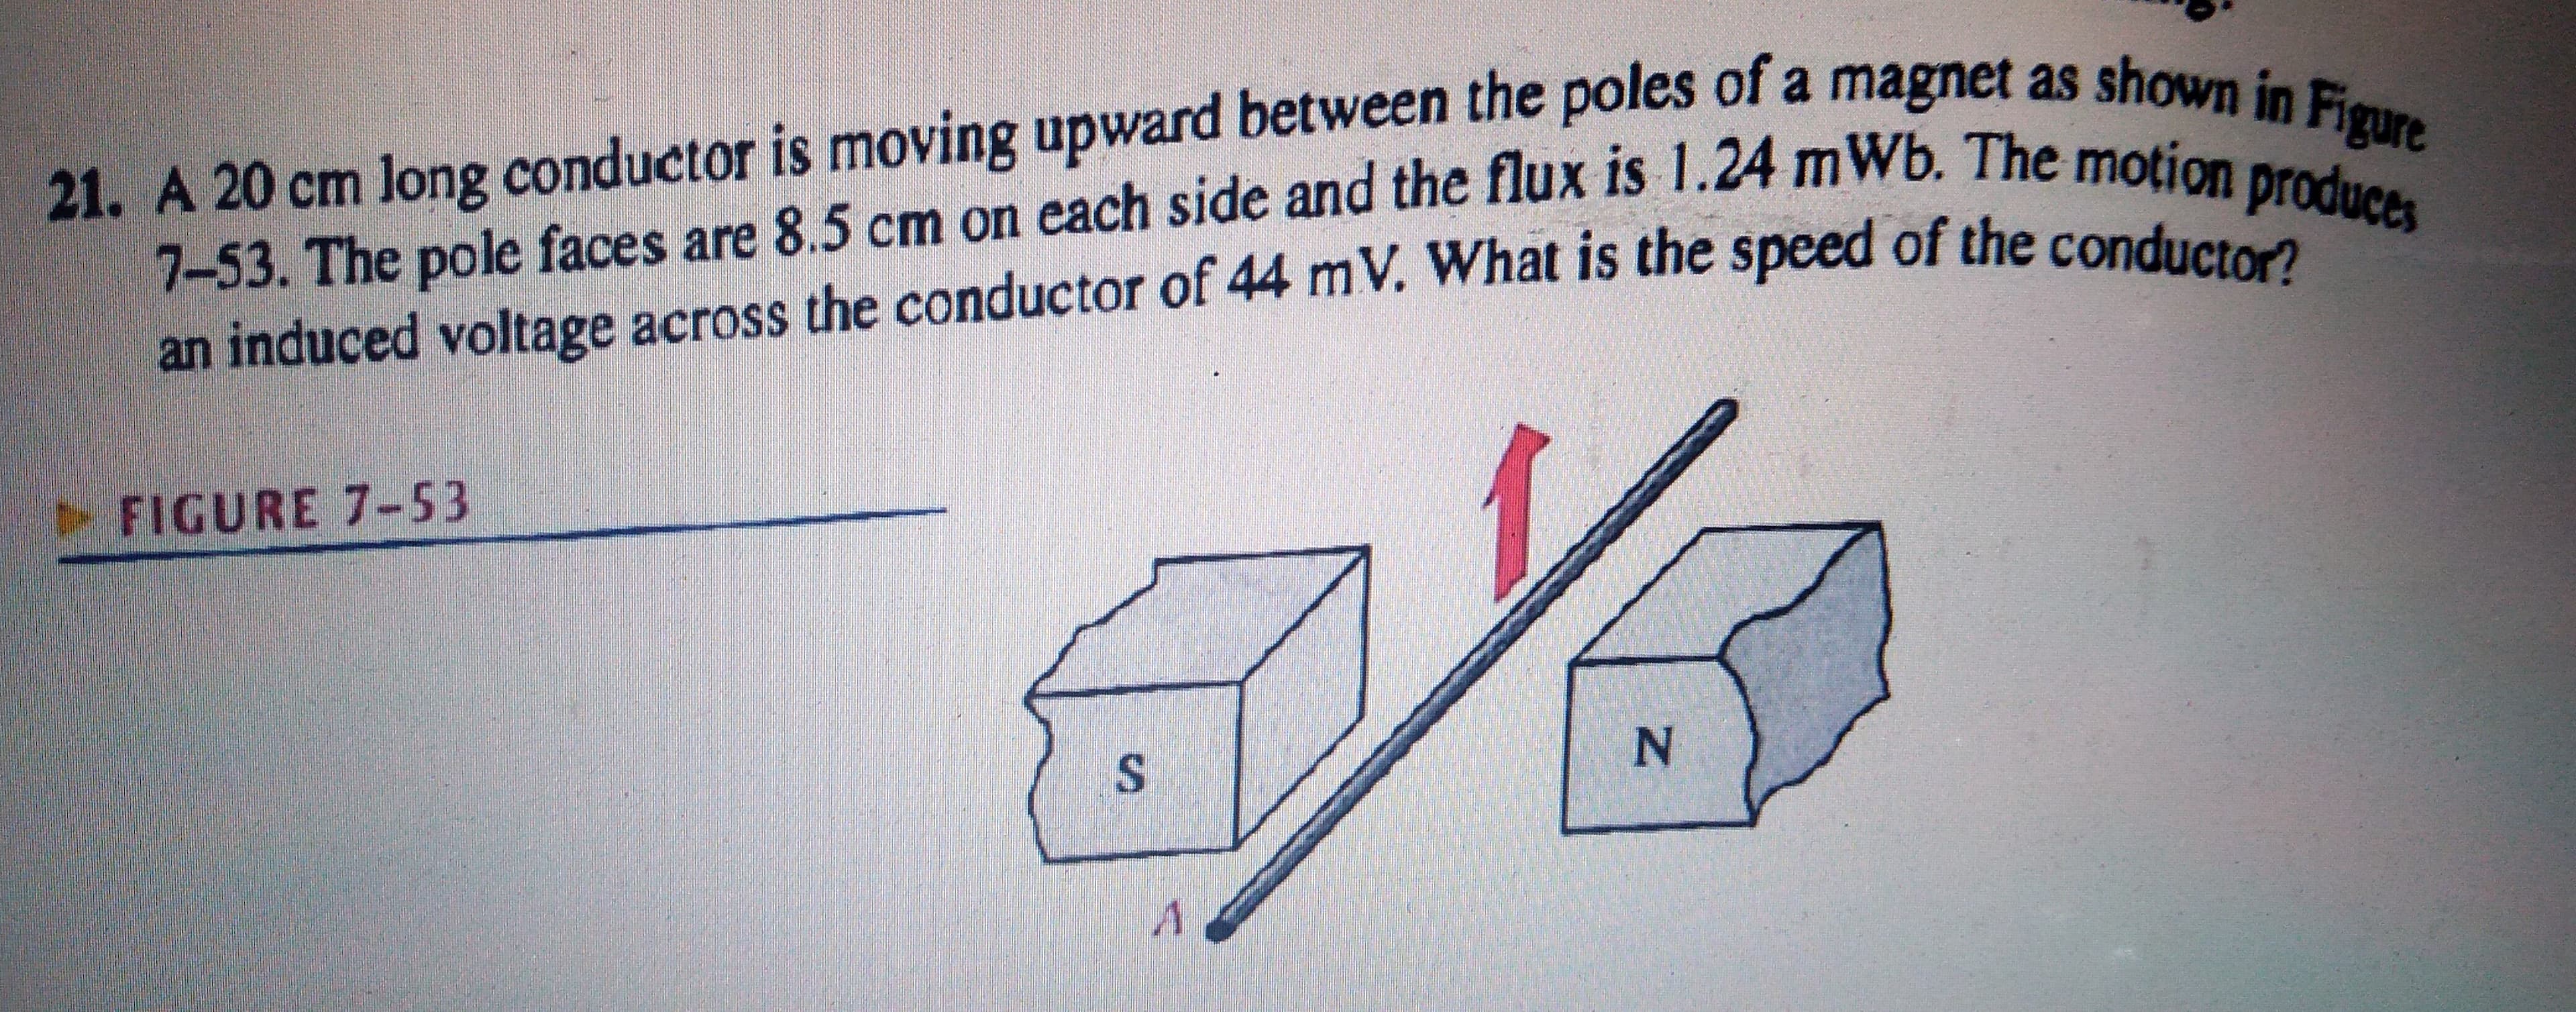 21. A 20 cm long conductor is moving upward between the poles of a magnet as shown in Figure
7-53. The pole faces are 8.5 cm on each side and the flux is 1.24 mWb. The motion produces
an induced voltage across the conductor of 44 mV. What is the speed of the conductor?
FIGURE 7-53
%S4
